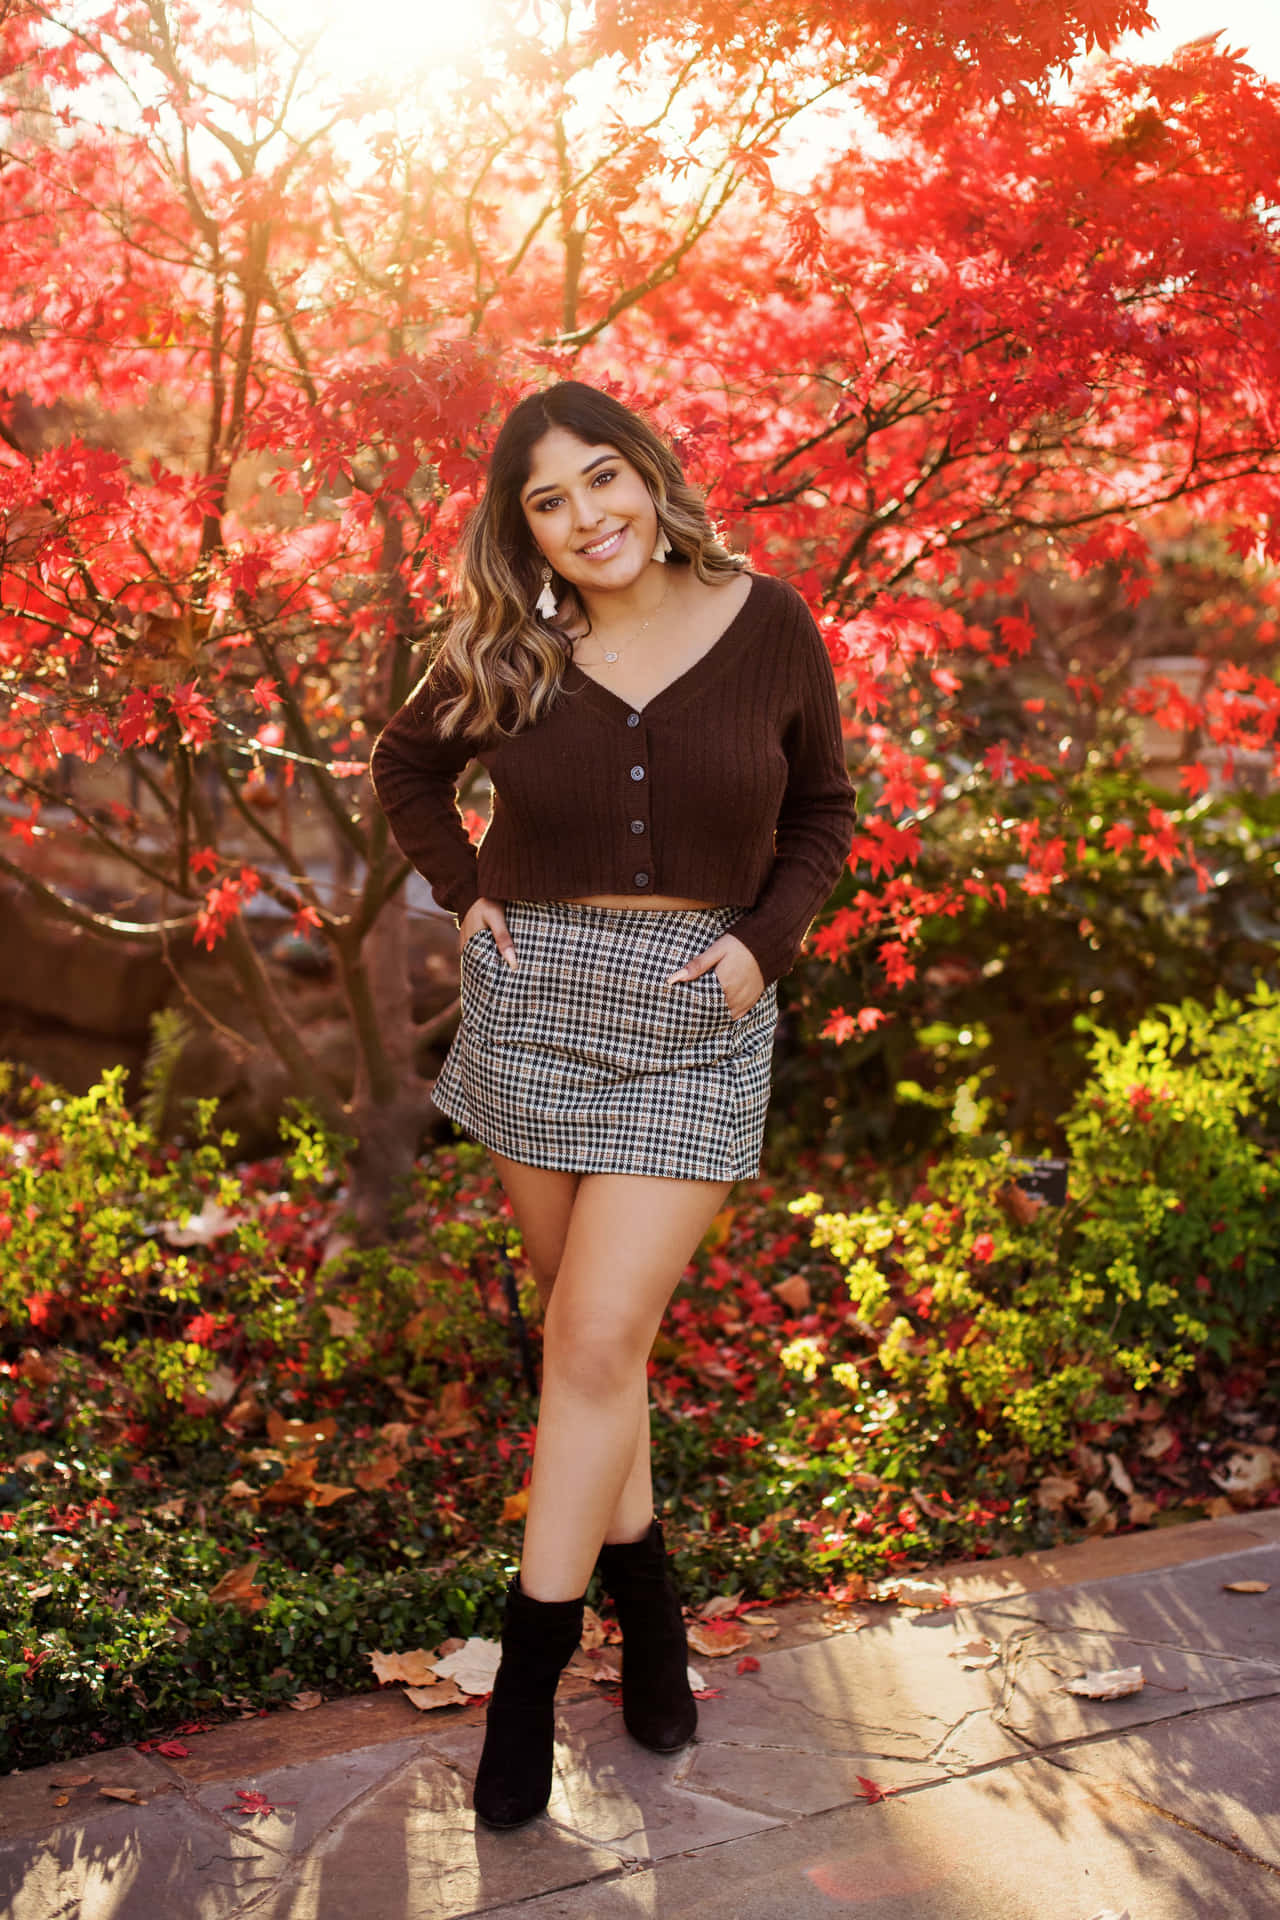 A Woman In A Plaid Skirt Poses In Front Of A Red Tree